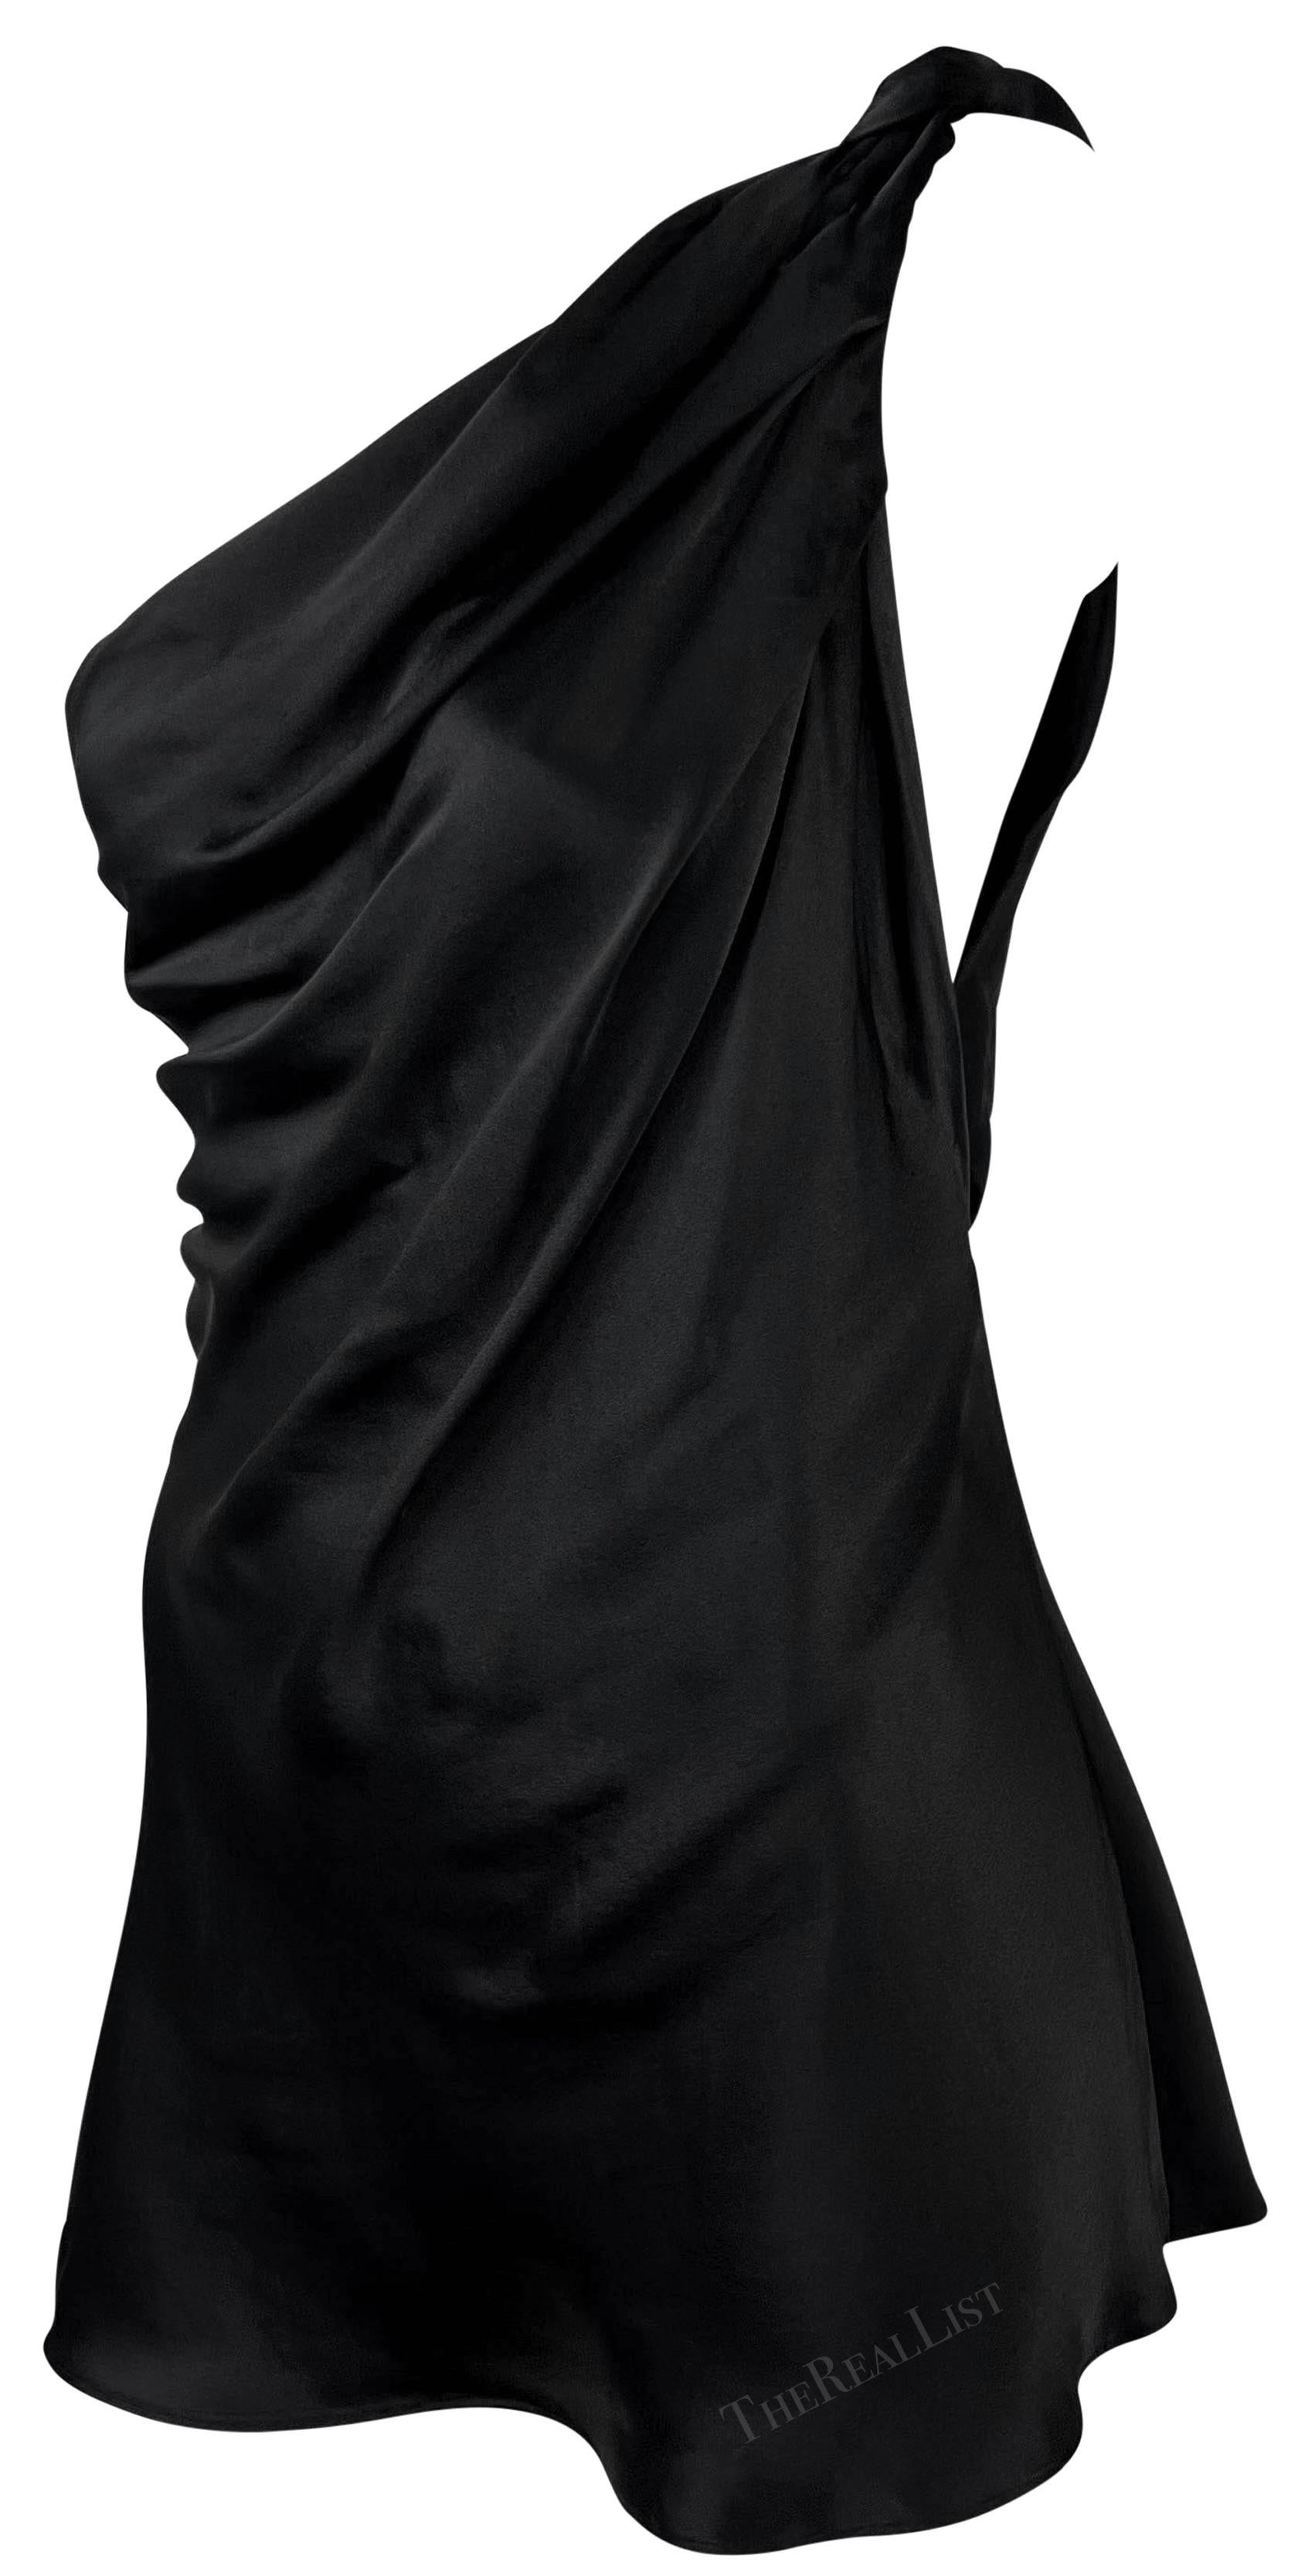 NWT F/W 2002 Dolce & Gabbana Black Silk Satin Asymmetric Super Mini Dress In Excellent Condition For Sale In West Hollywood, CA